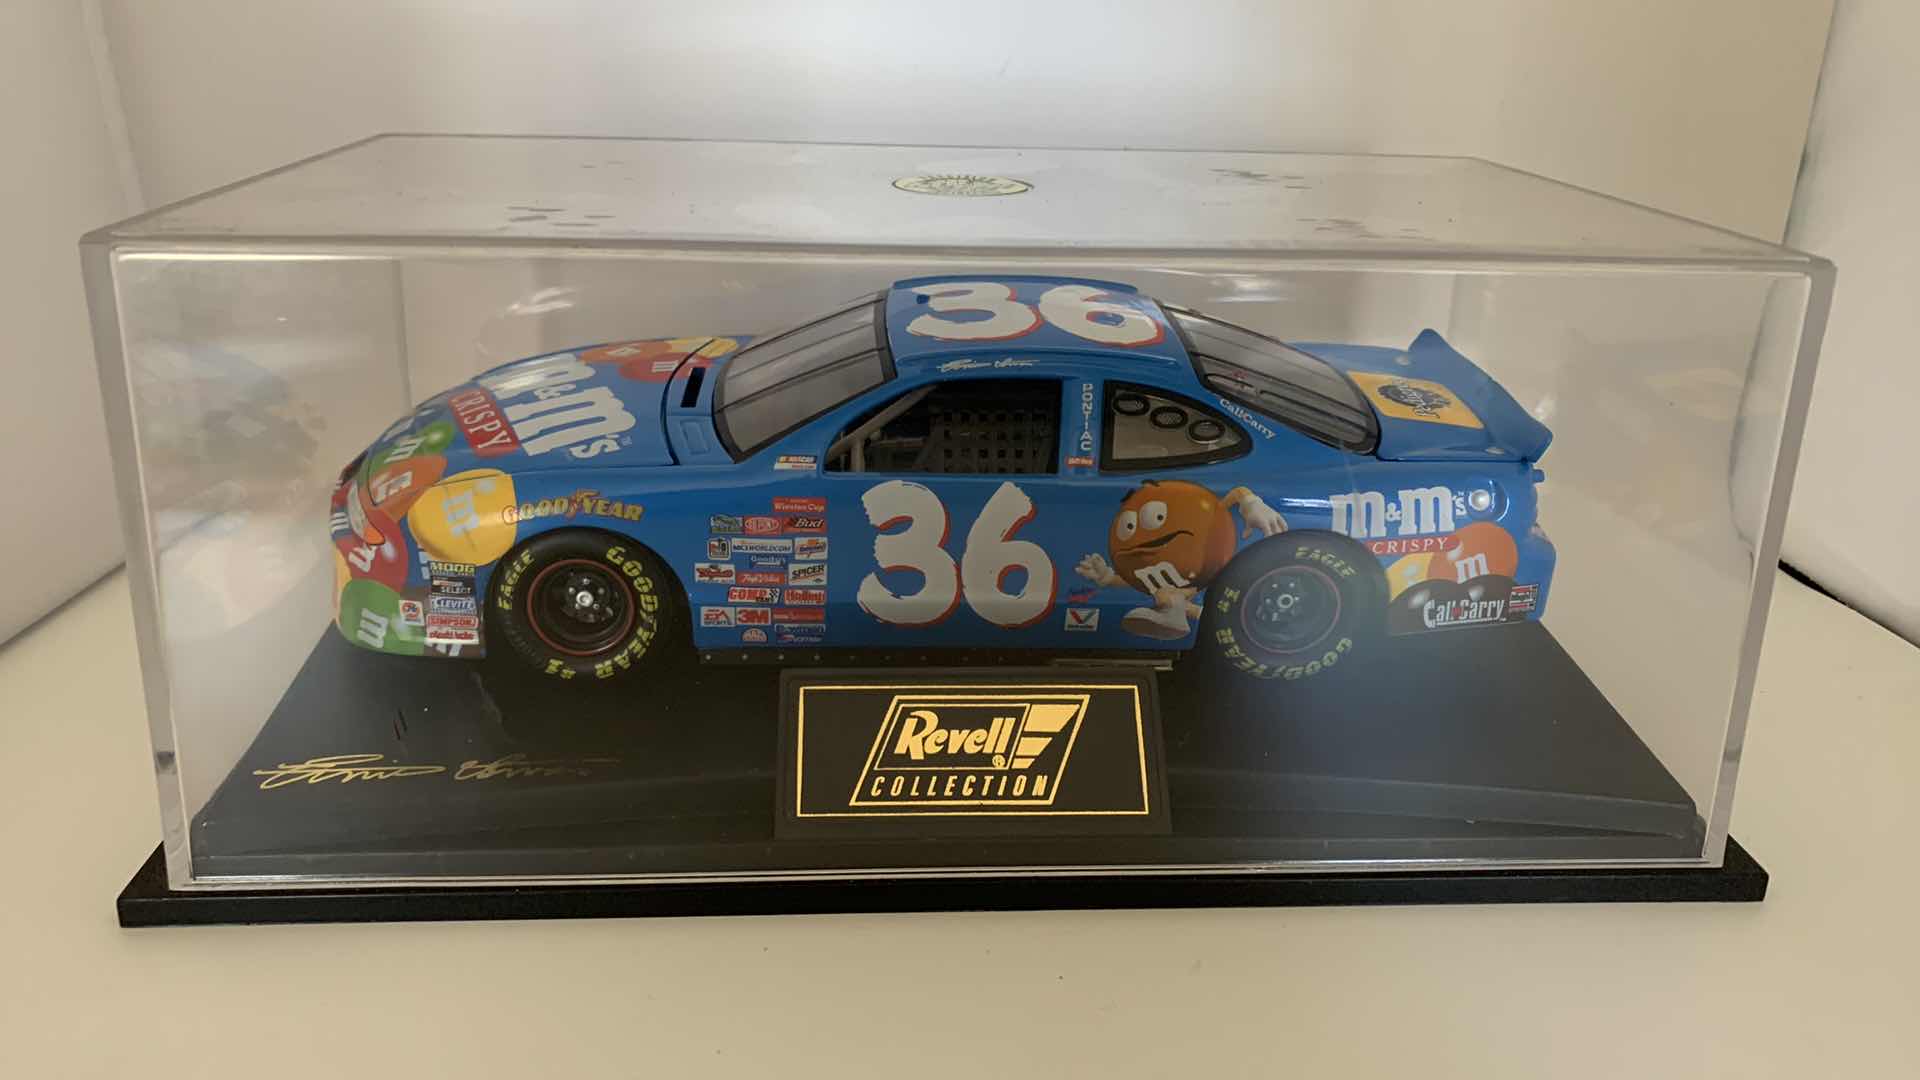 Photo 1 of M&M #36 REVELL COLLECTION ERNIE IRVAN DIE CAST CAR IN SHOW CASE.